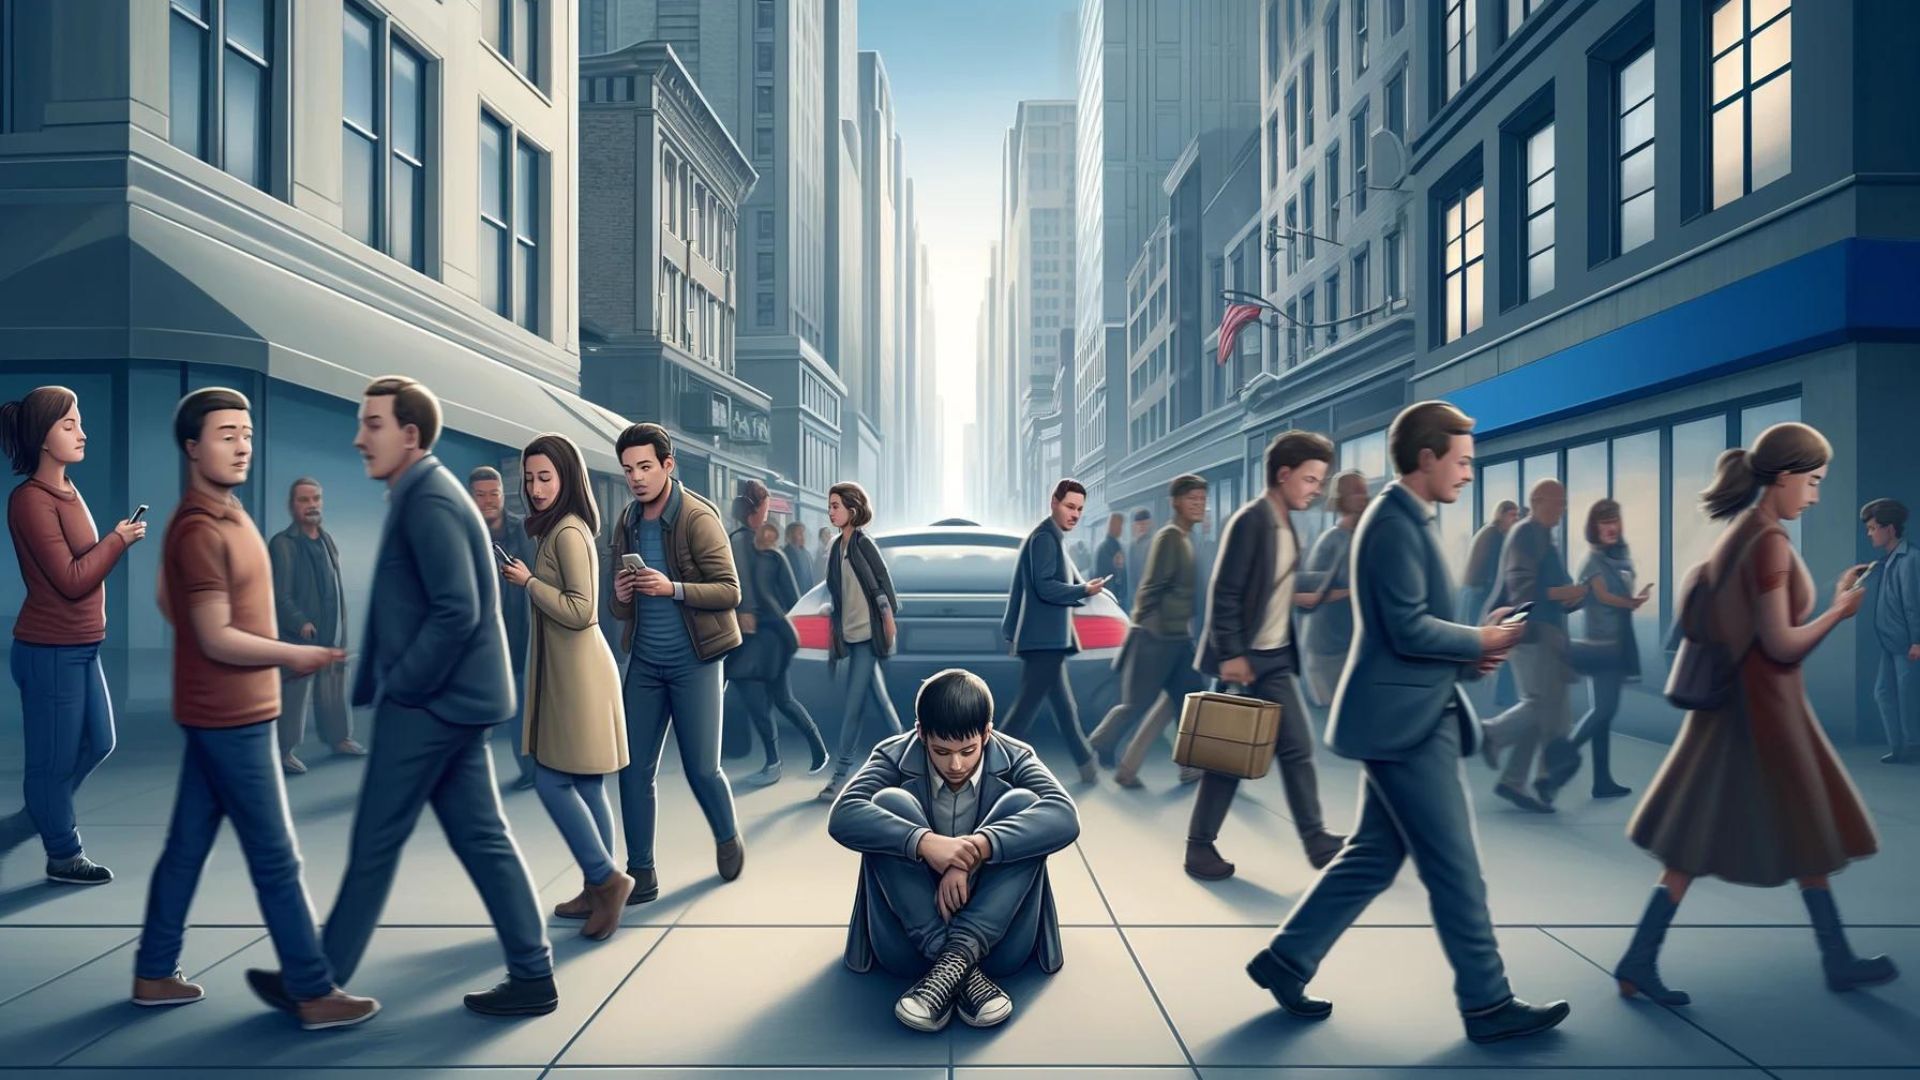 The bystander effect